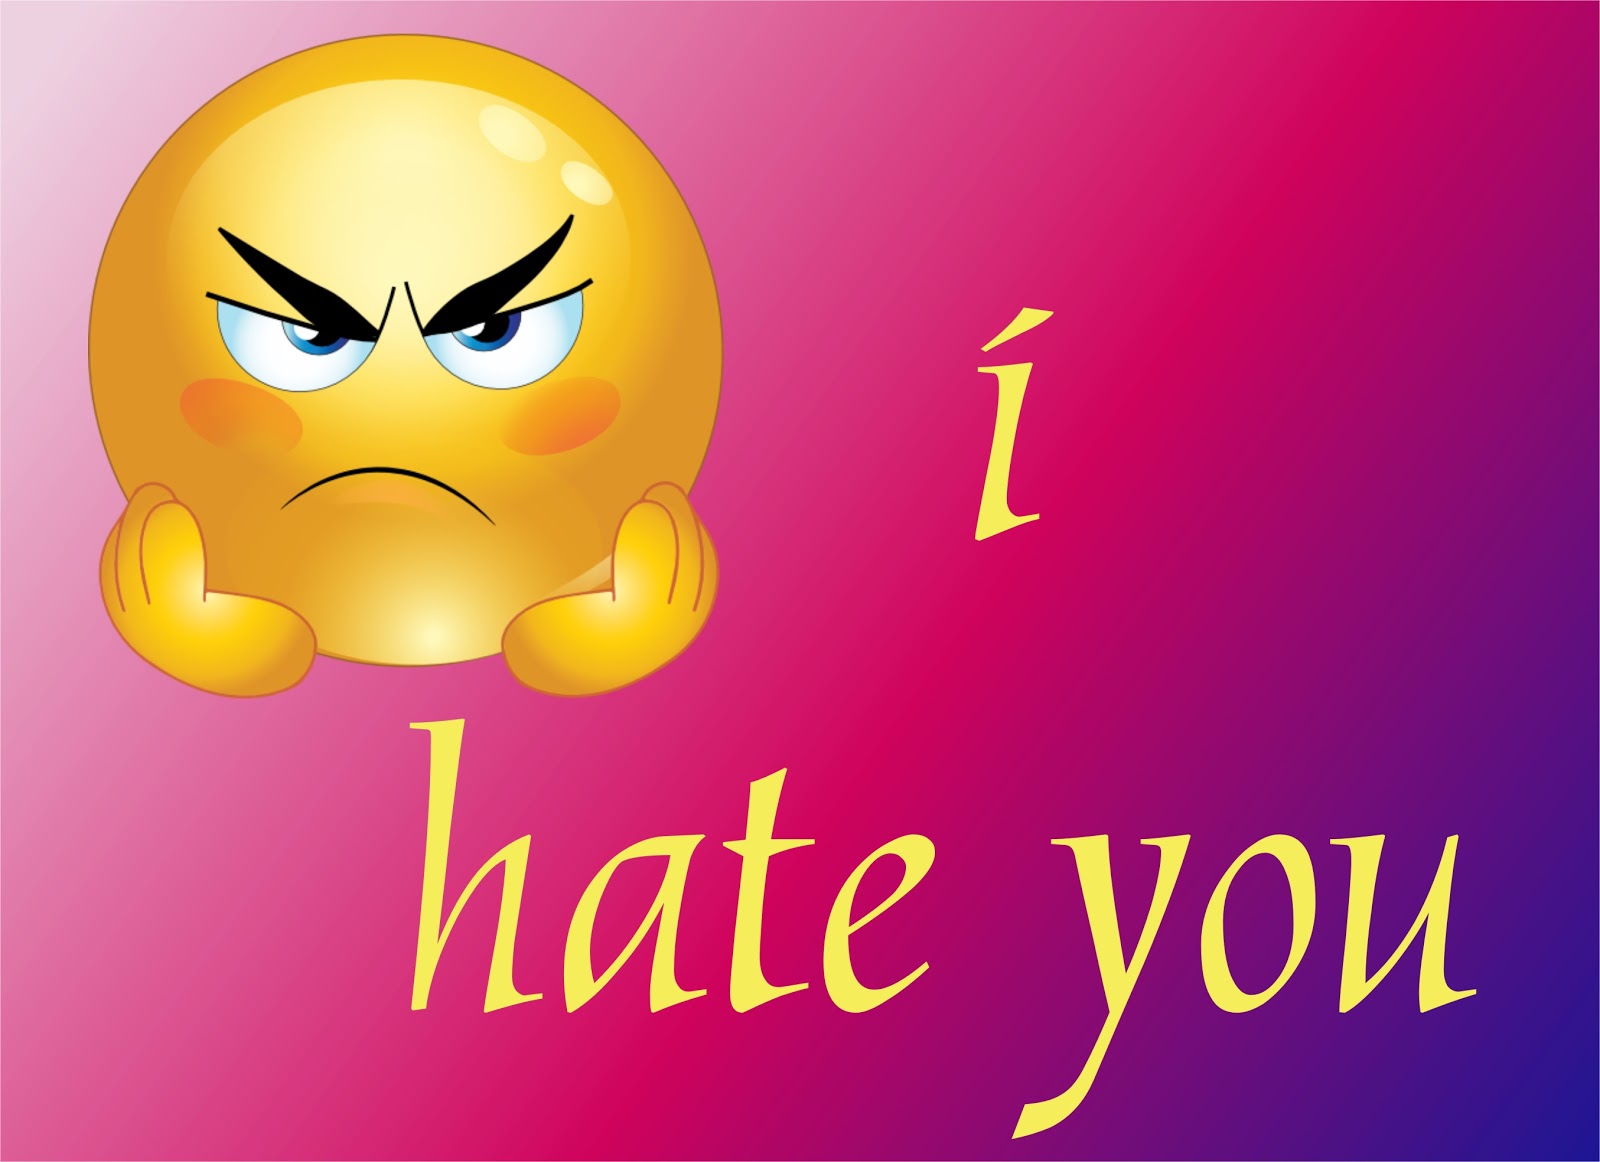 I Hate You Images I Hate You Images For Whatsapp Dp Satrangi91